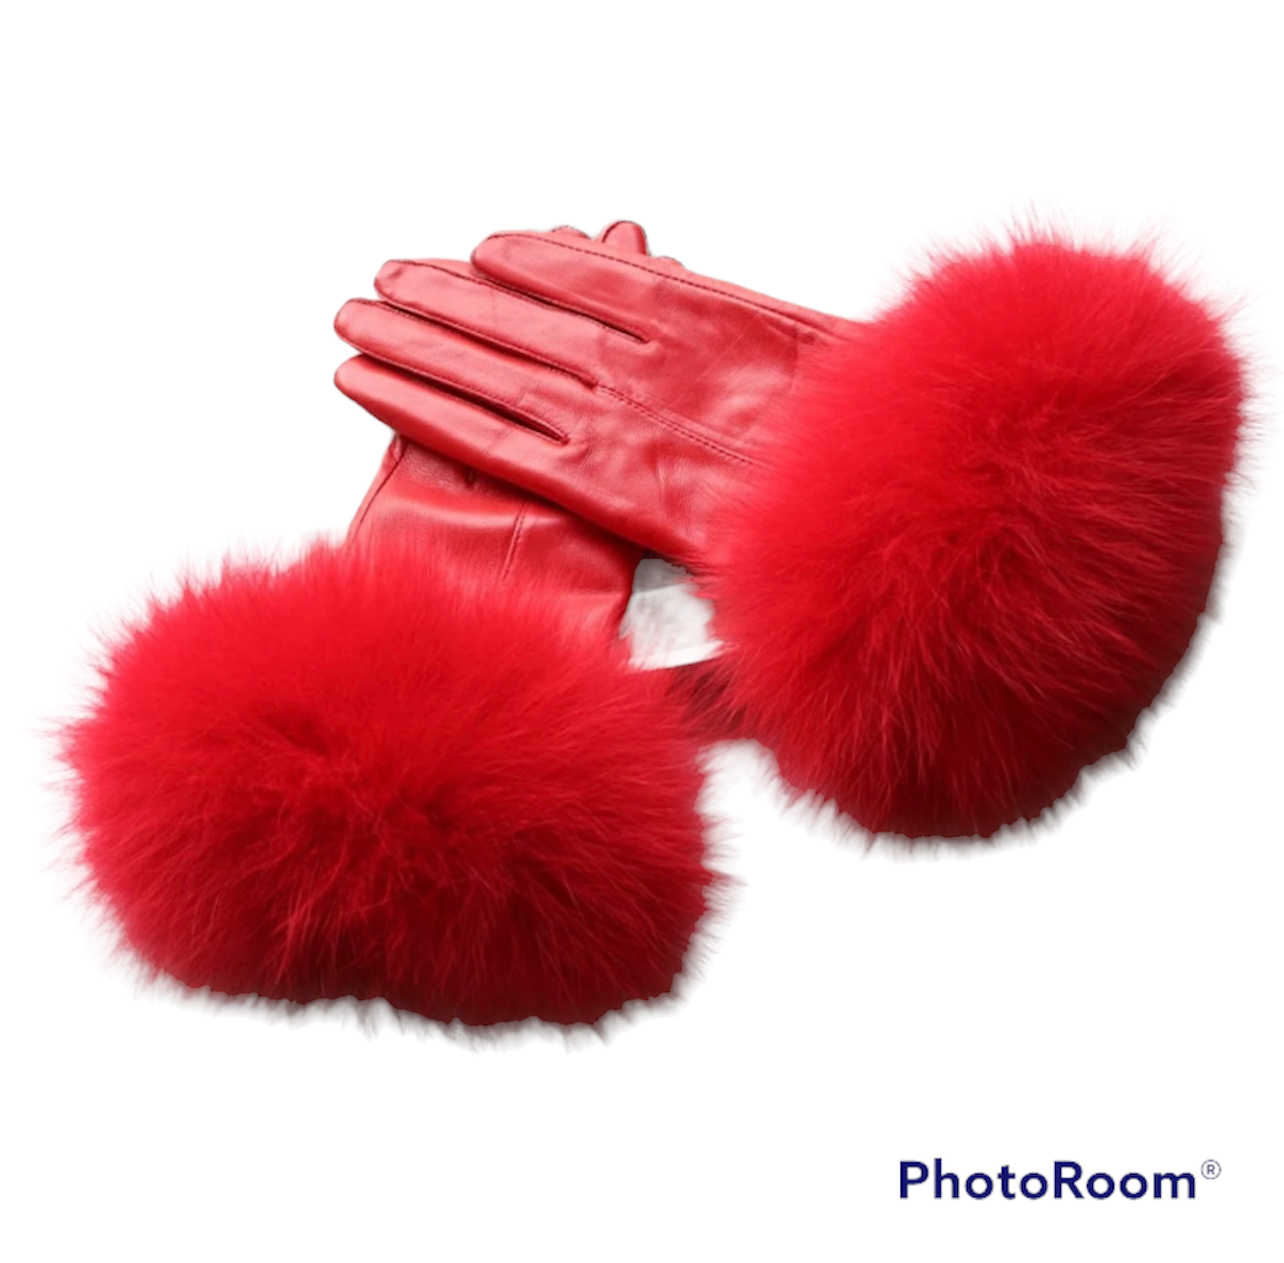 Kaamra’s Luxury leather gloves, watermelon red